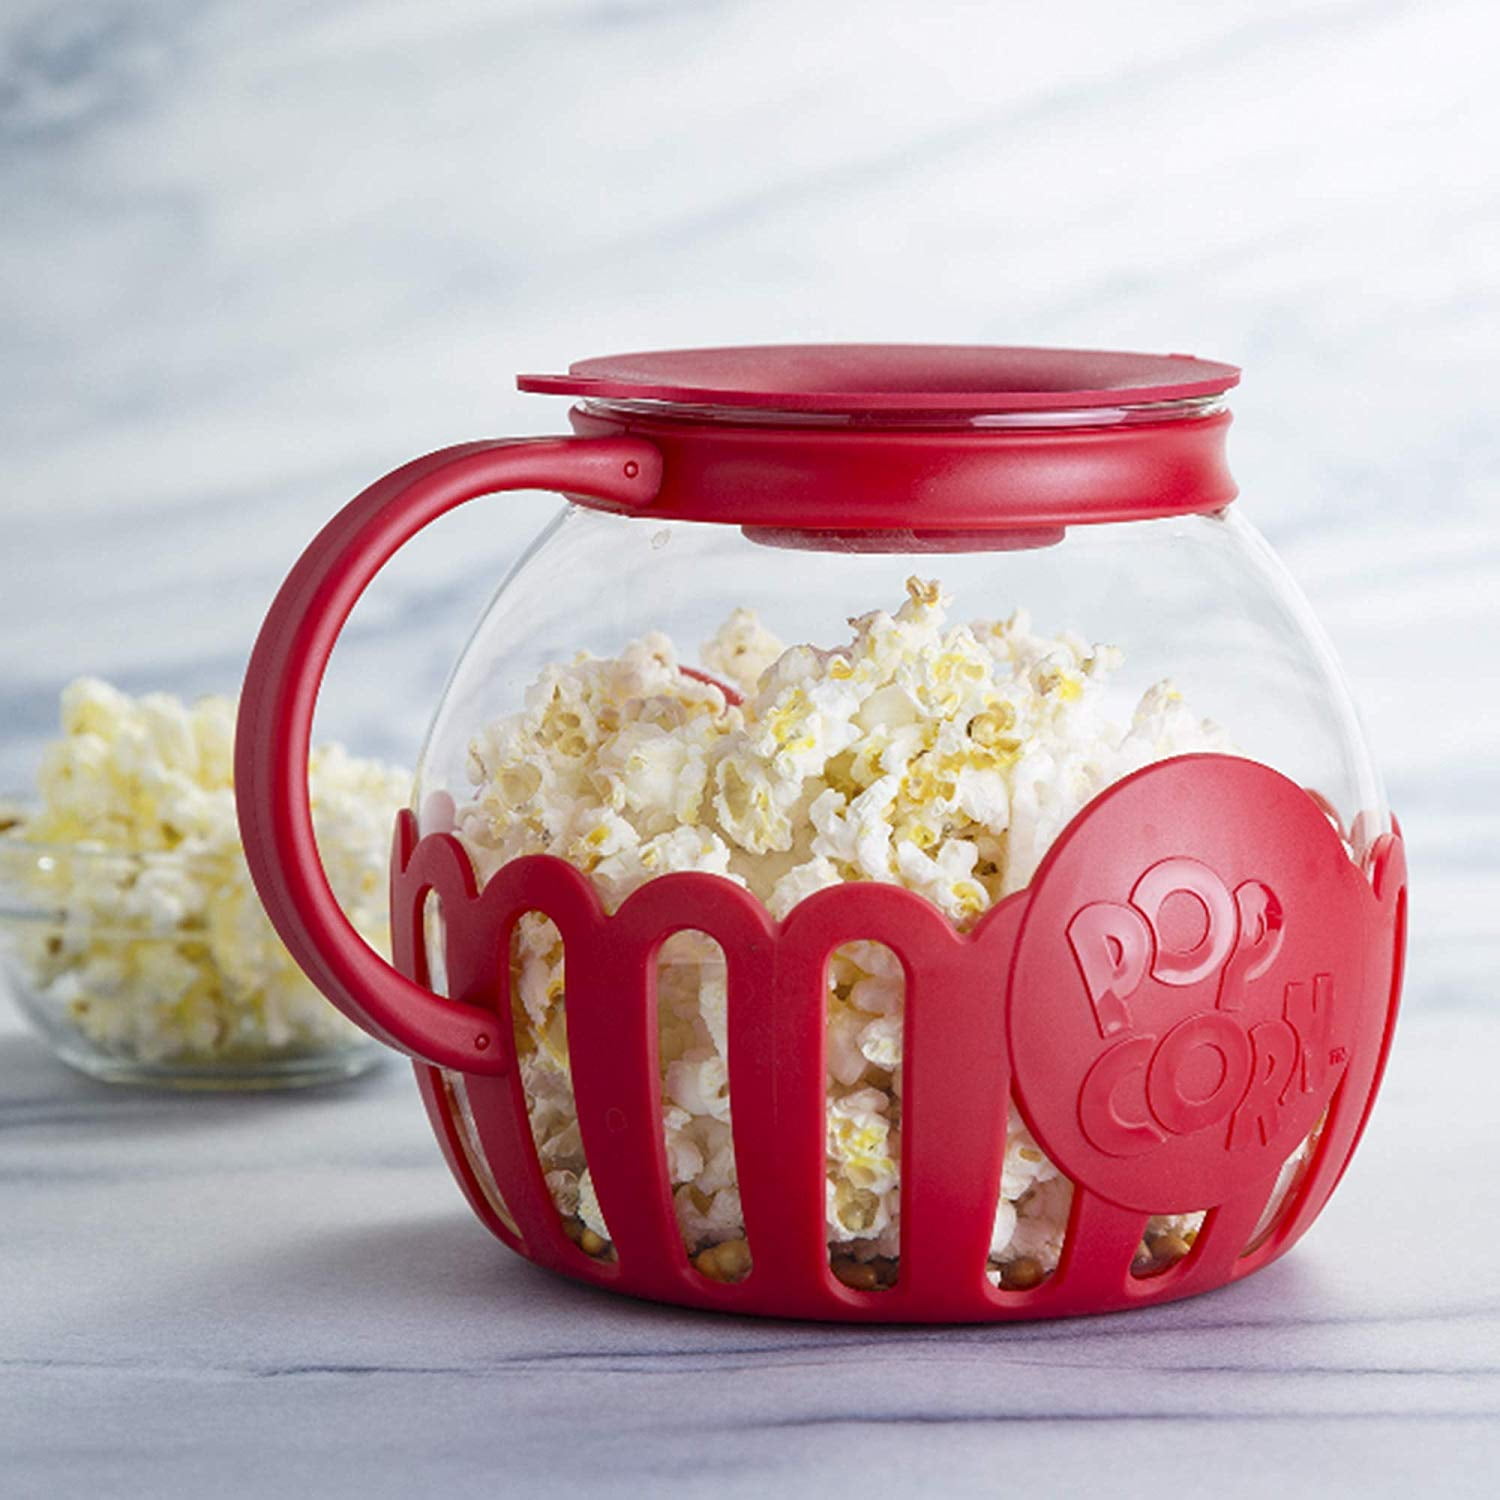 New Ecolution Kitchen Extras Micro Popcorn Maker Clear Free Shipping 3 quart 